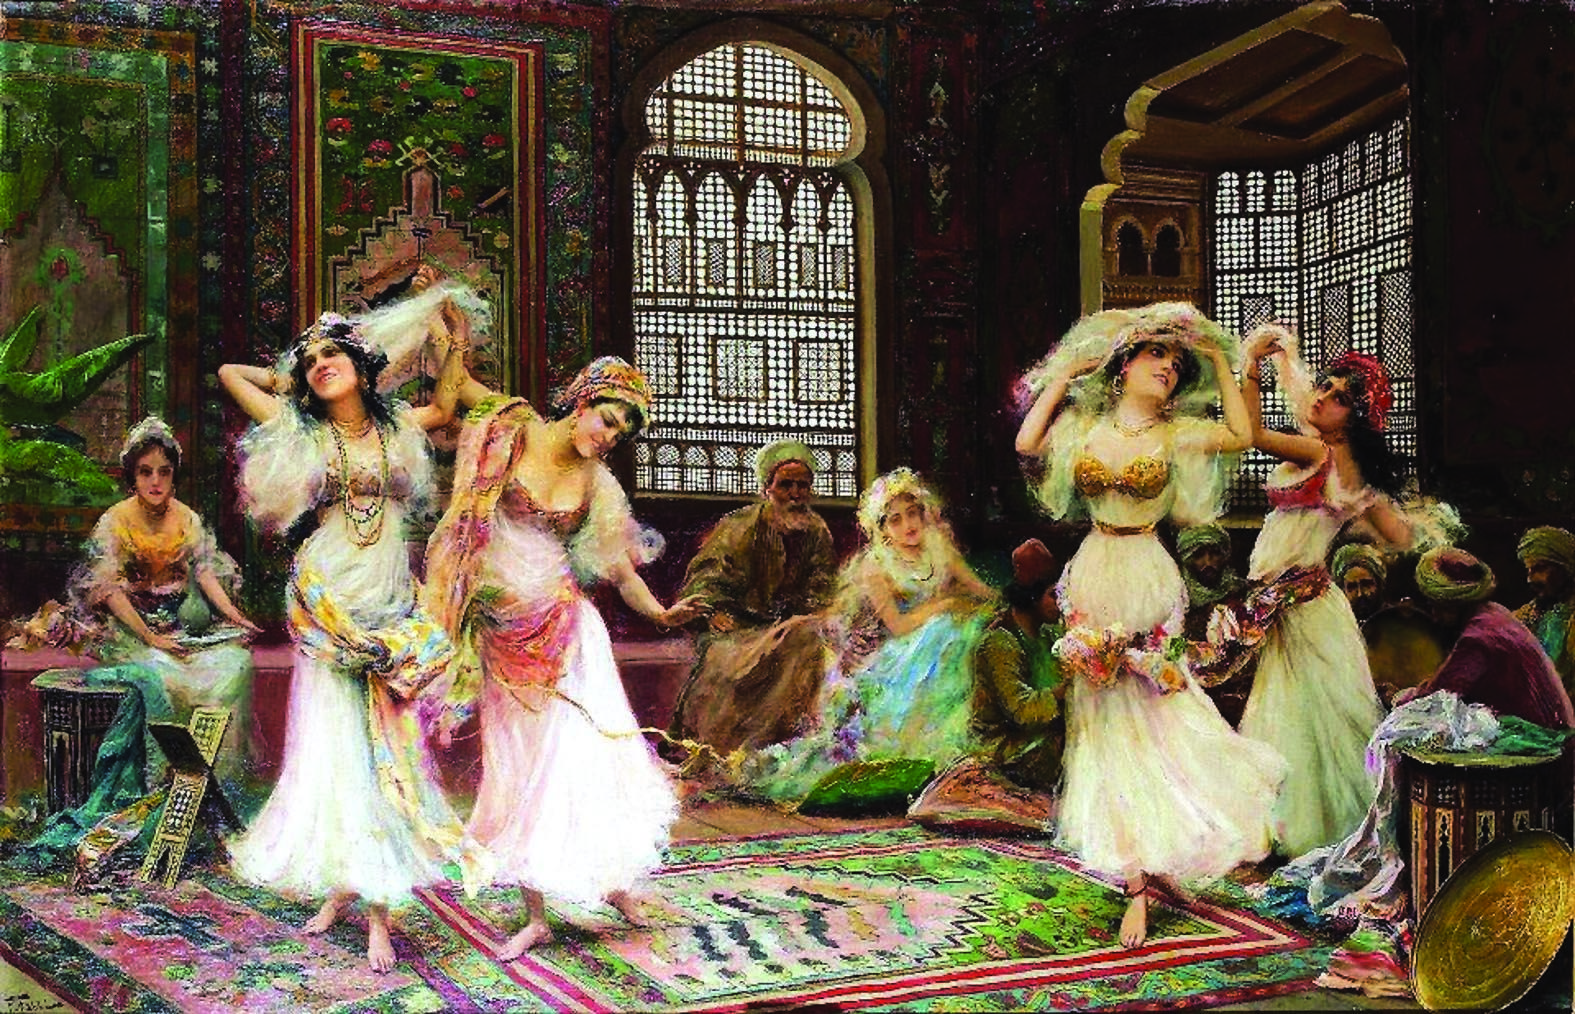 Prostitution in the Ottoman Empire